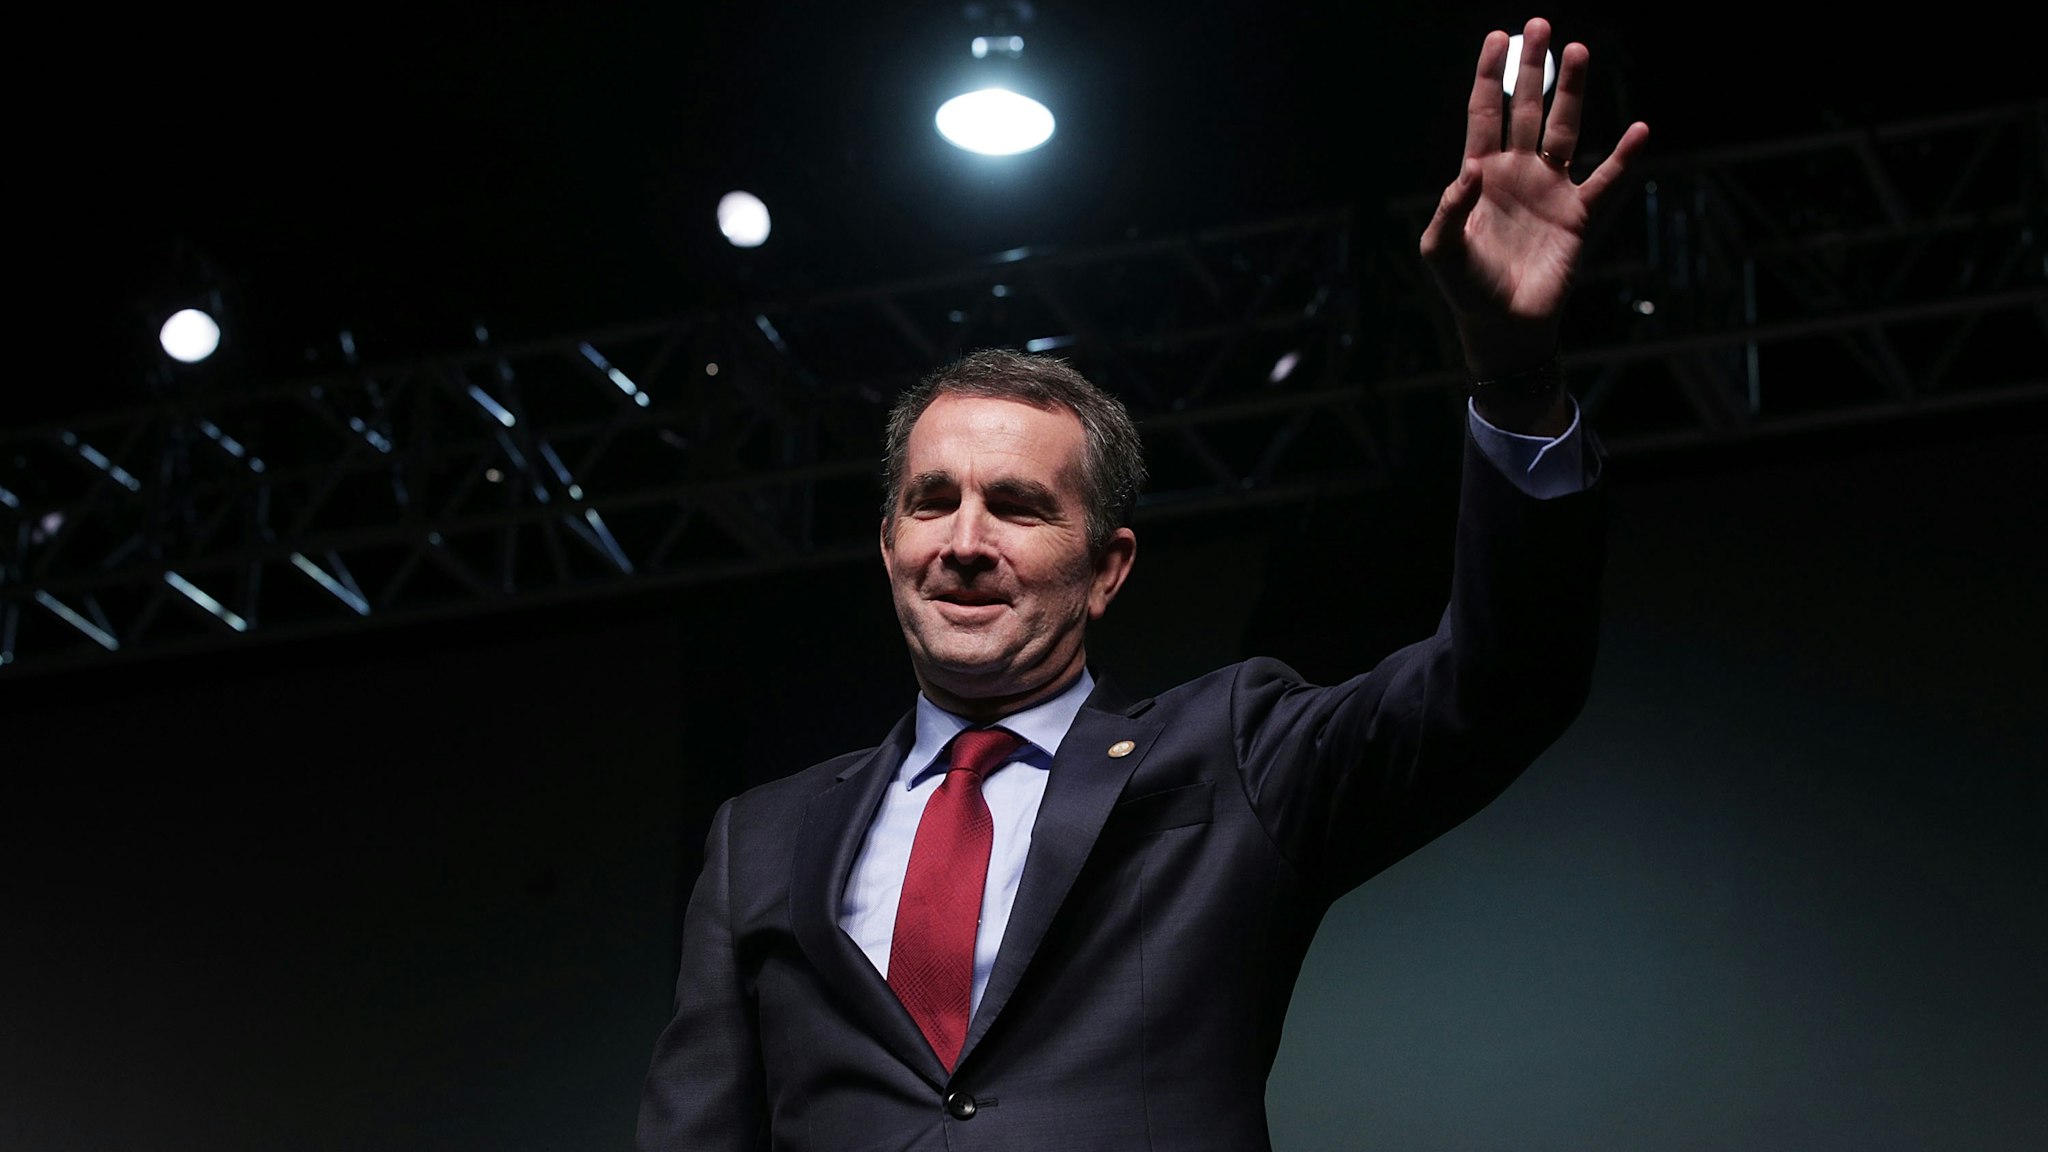 RICHMOND, VA - OCTOBER 19: Democratic gubernatorial candidate and Virginia Lieutenant Governor Ralph Northam waves during a campaign event at the Greater Richmond Convention Center October 19, 2017 in Richmond, Virginia. Northam is running against Republican Ed Gillespie to be the next governor of Virginia.